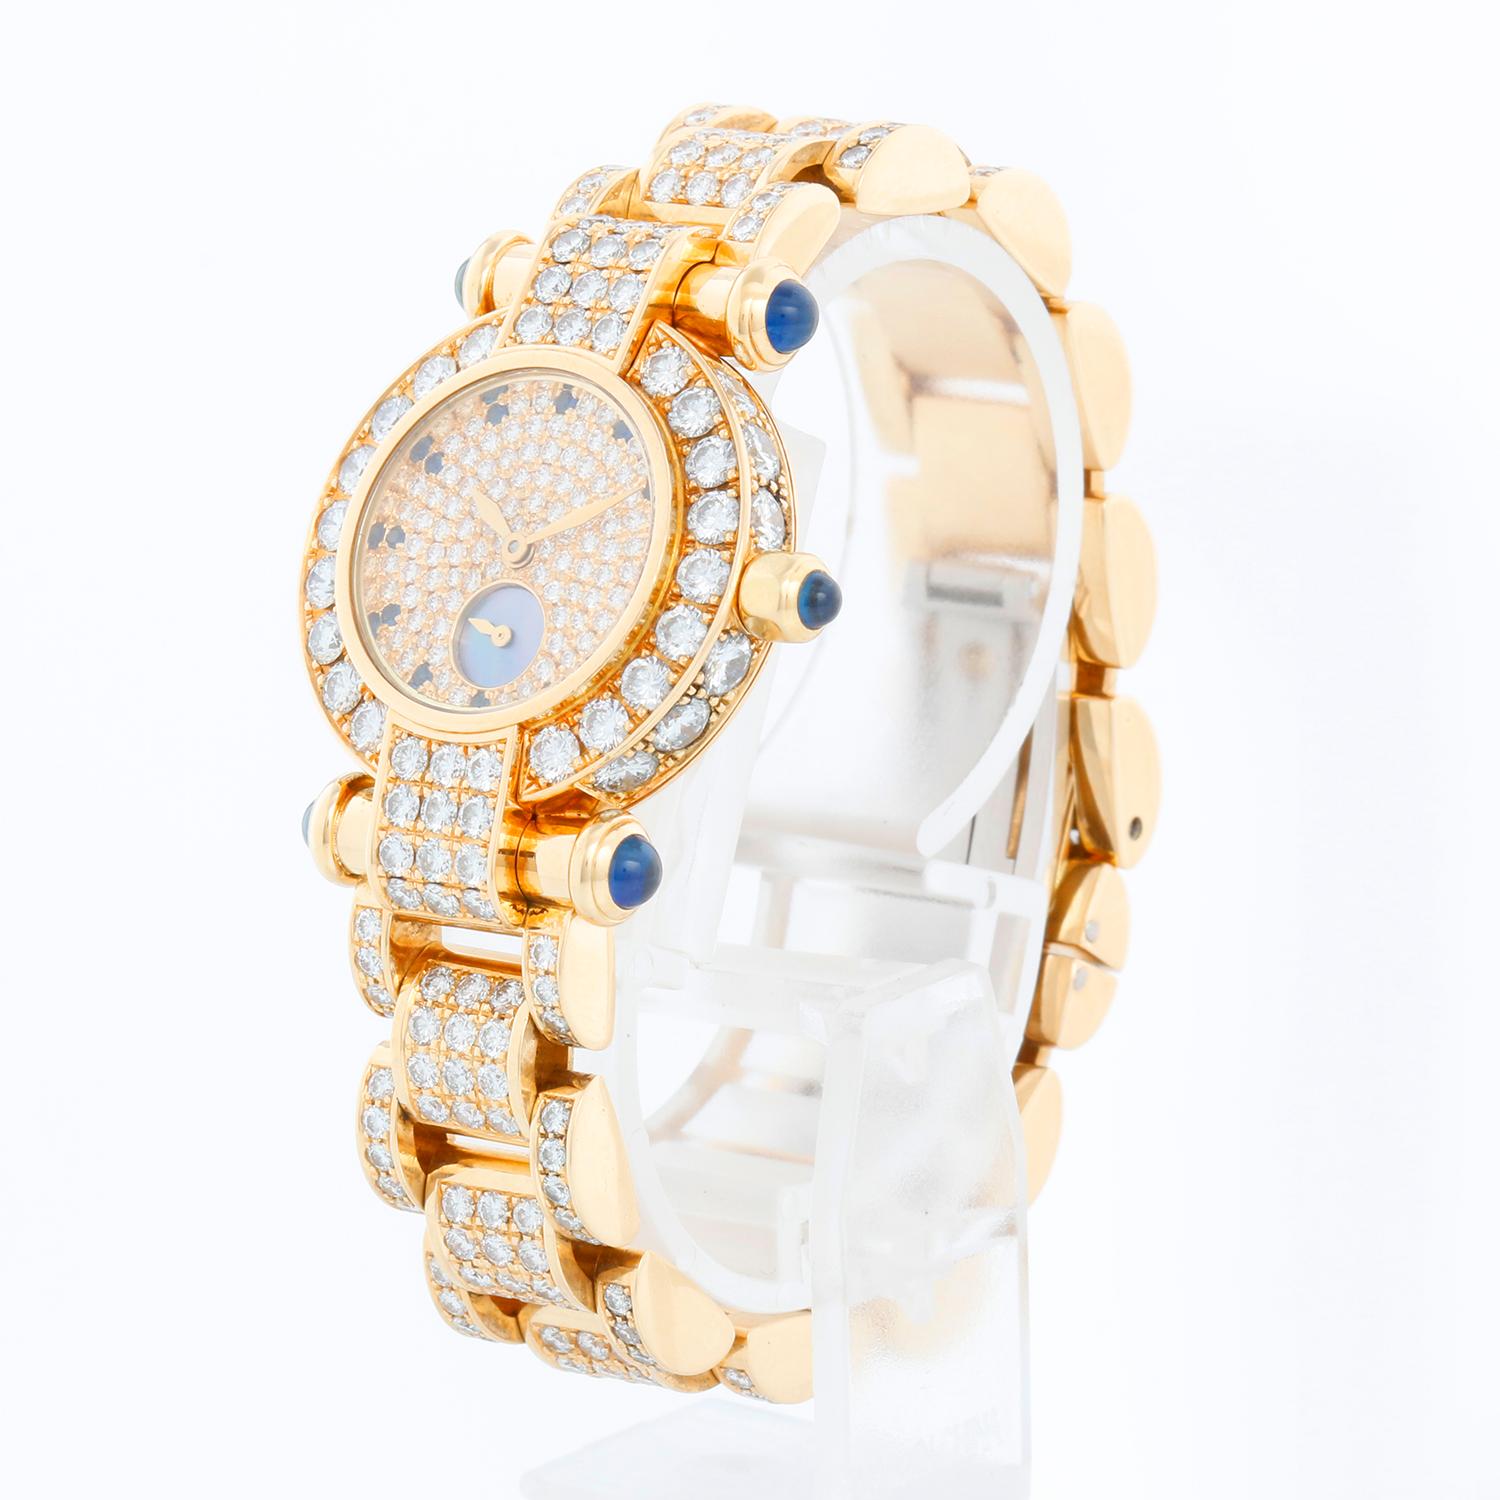 Chopard Imperiale 18k Yellow Gold Ladies Watch 39/3368-23 - Quartz. 18k yellow gold case with diamond bezel and diamond lugs (32mm diameter). Pave diamond dial with Tahitian Mother of Pearl subdial and Sapphire hour markers. 18k yellow gold Pave